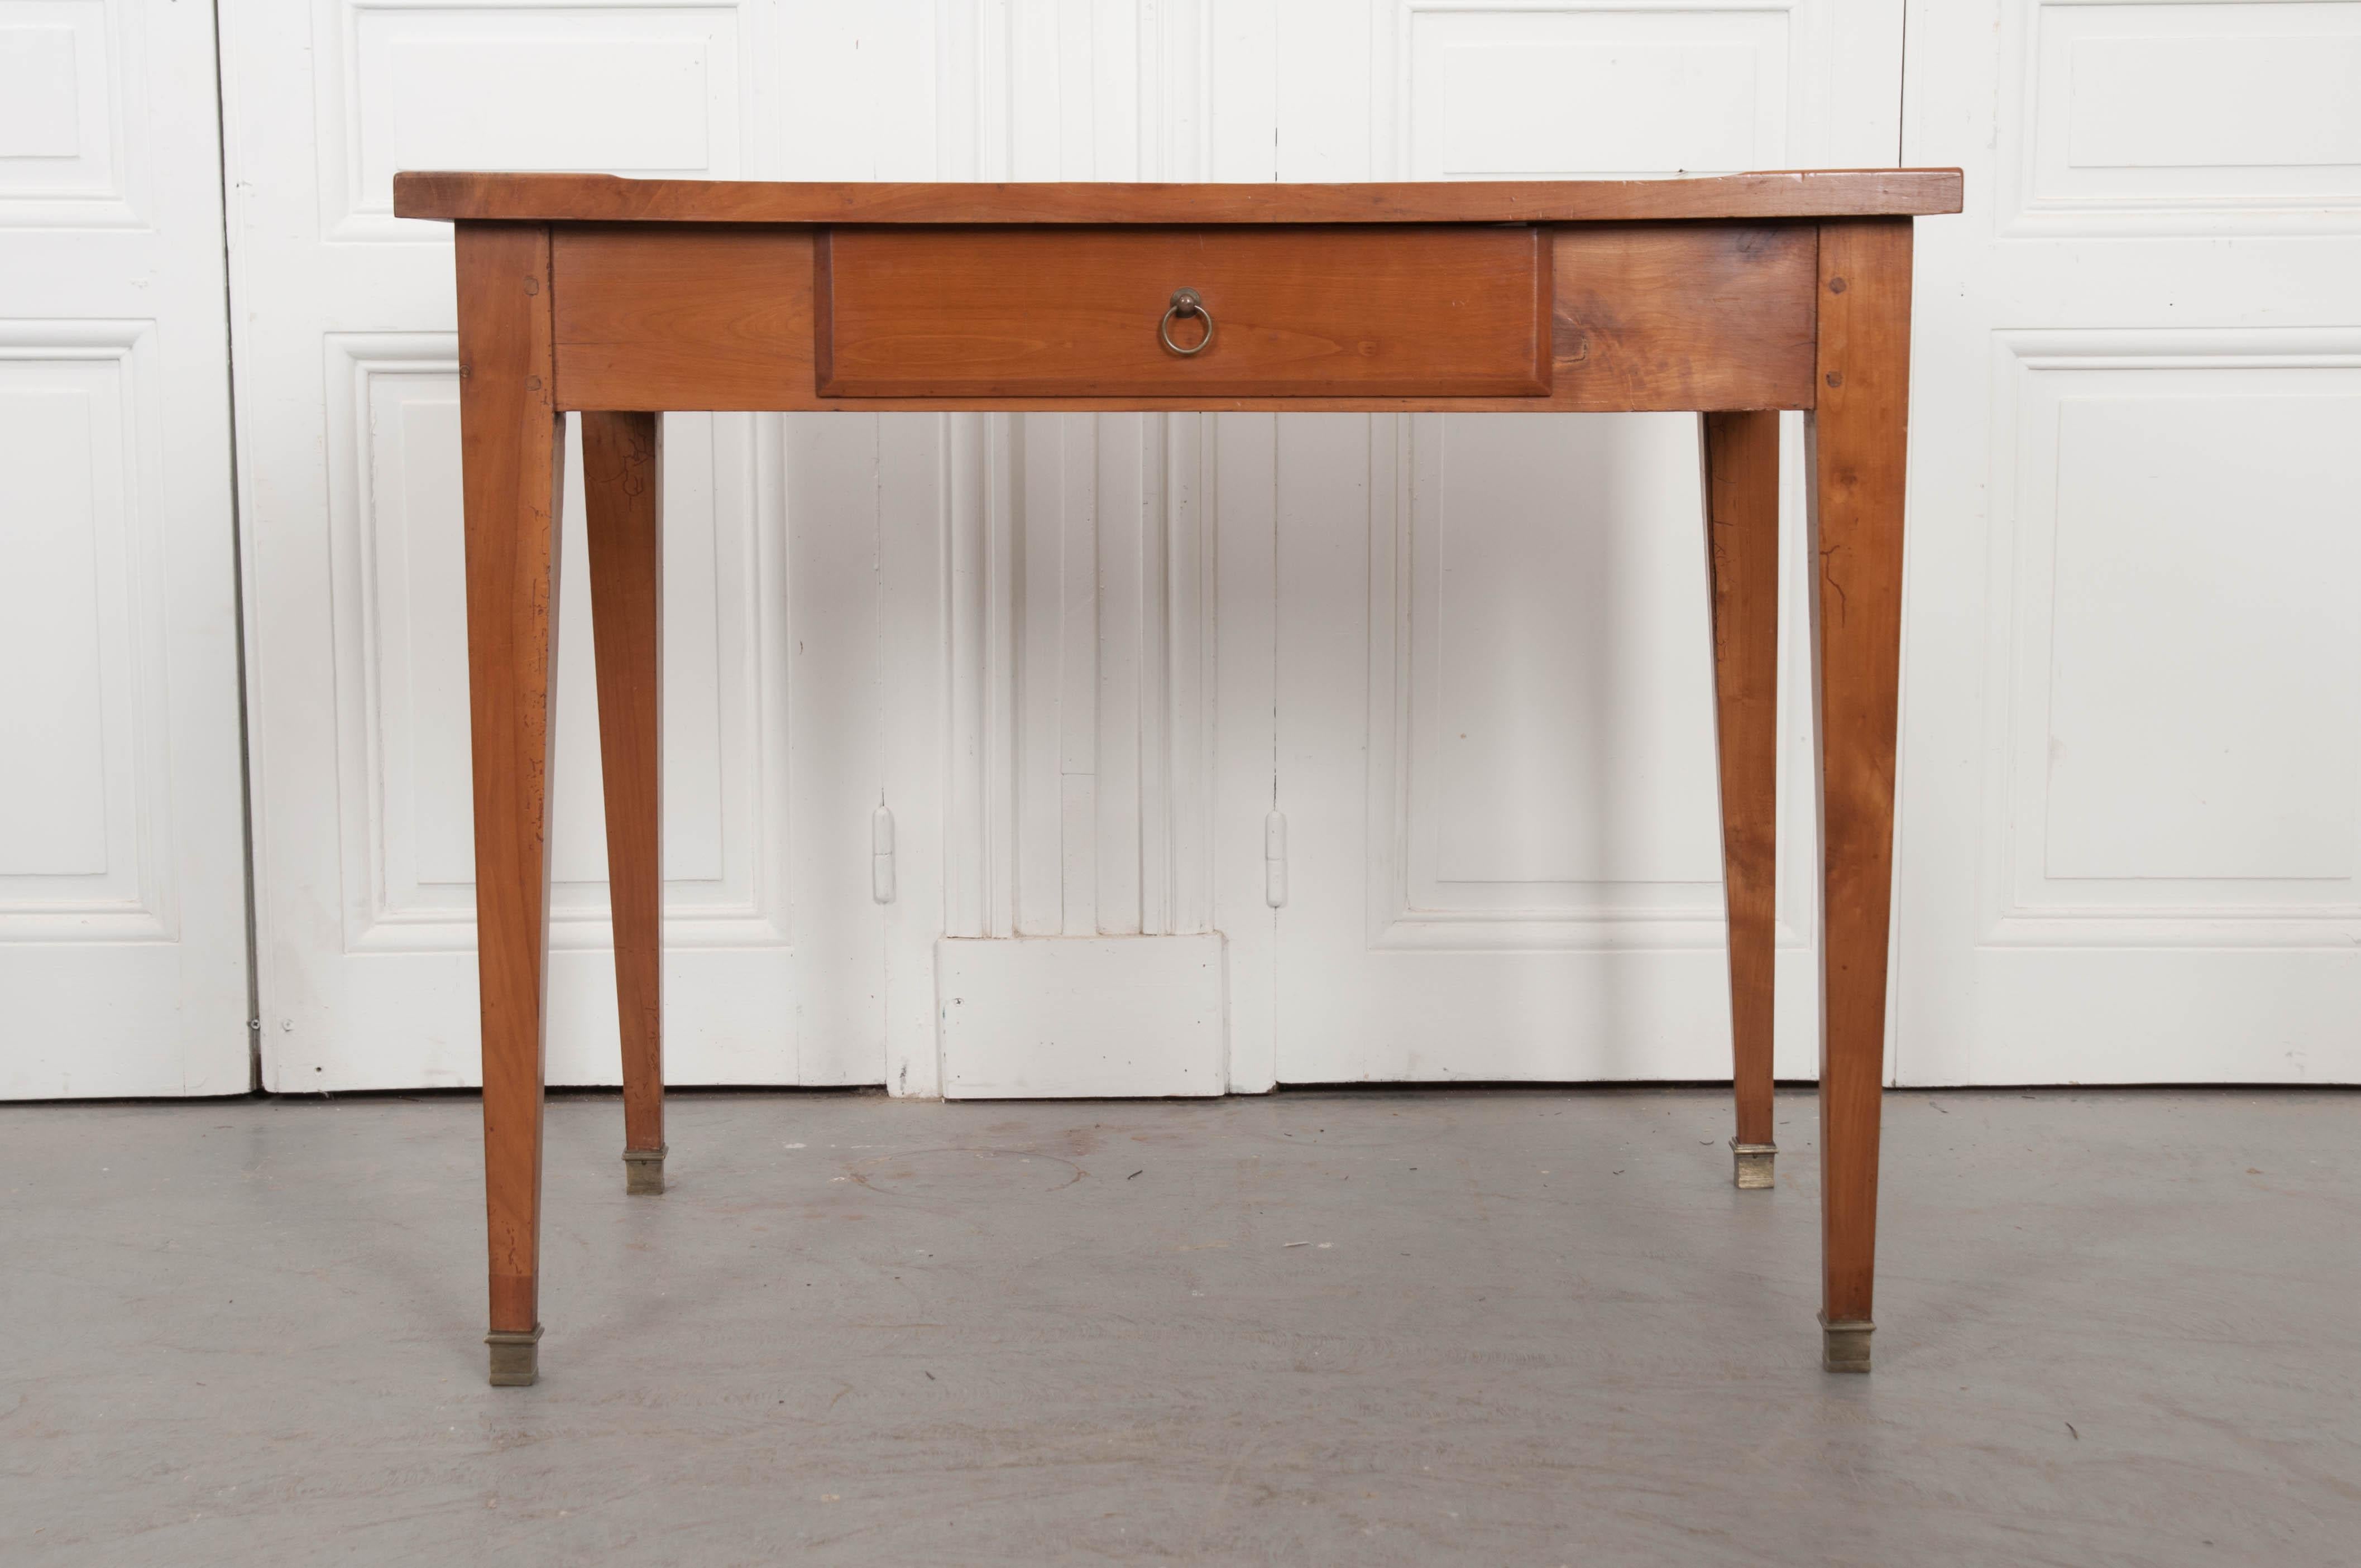 This elegant Directoire-style writing table, was made in France circa early 1900s, of pegged construction. The writing surface is covered in a gilt-tooled amber leather which exhibits a warm patina consistent with age and use. The apron is fitted